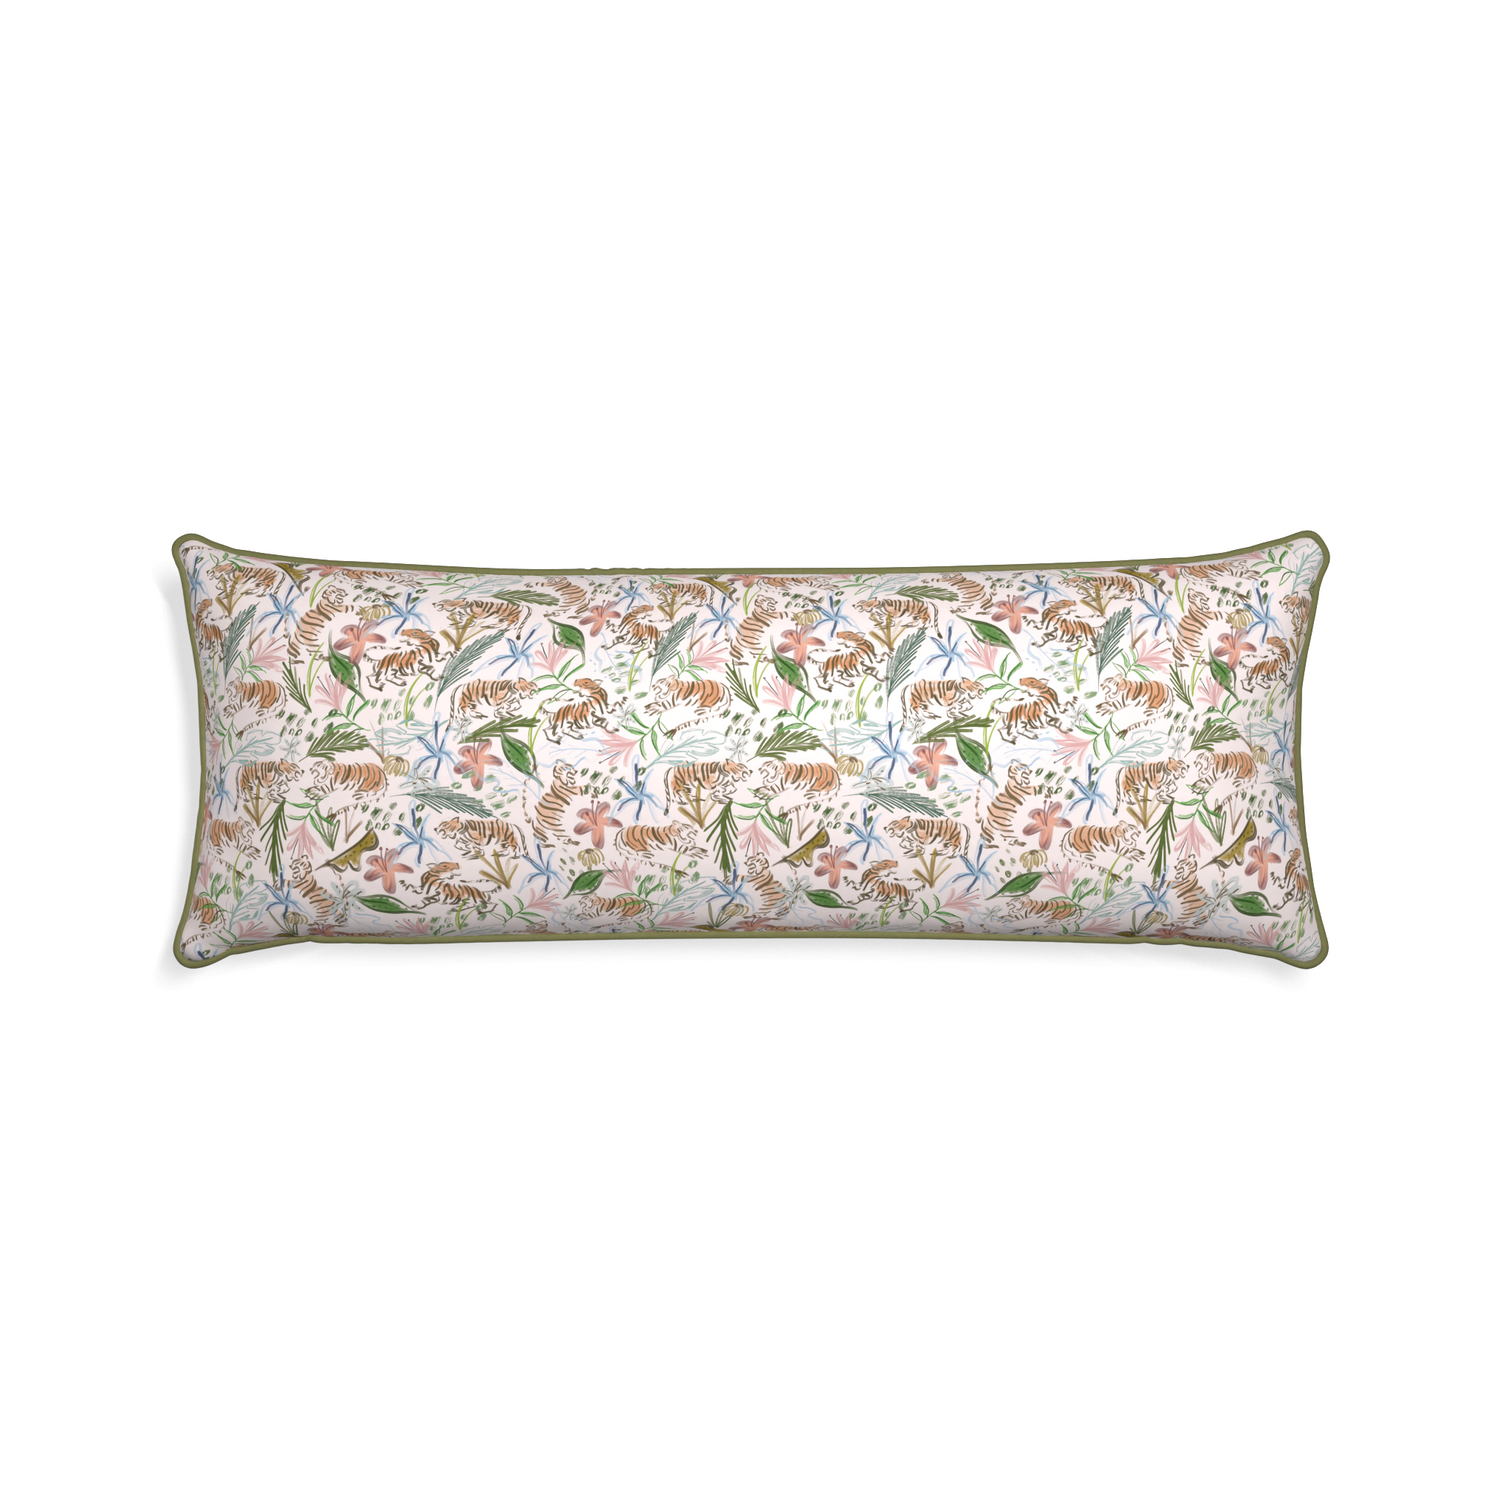 Xl-lumbar frida pink custom pillow with moss piping on white background